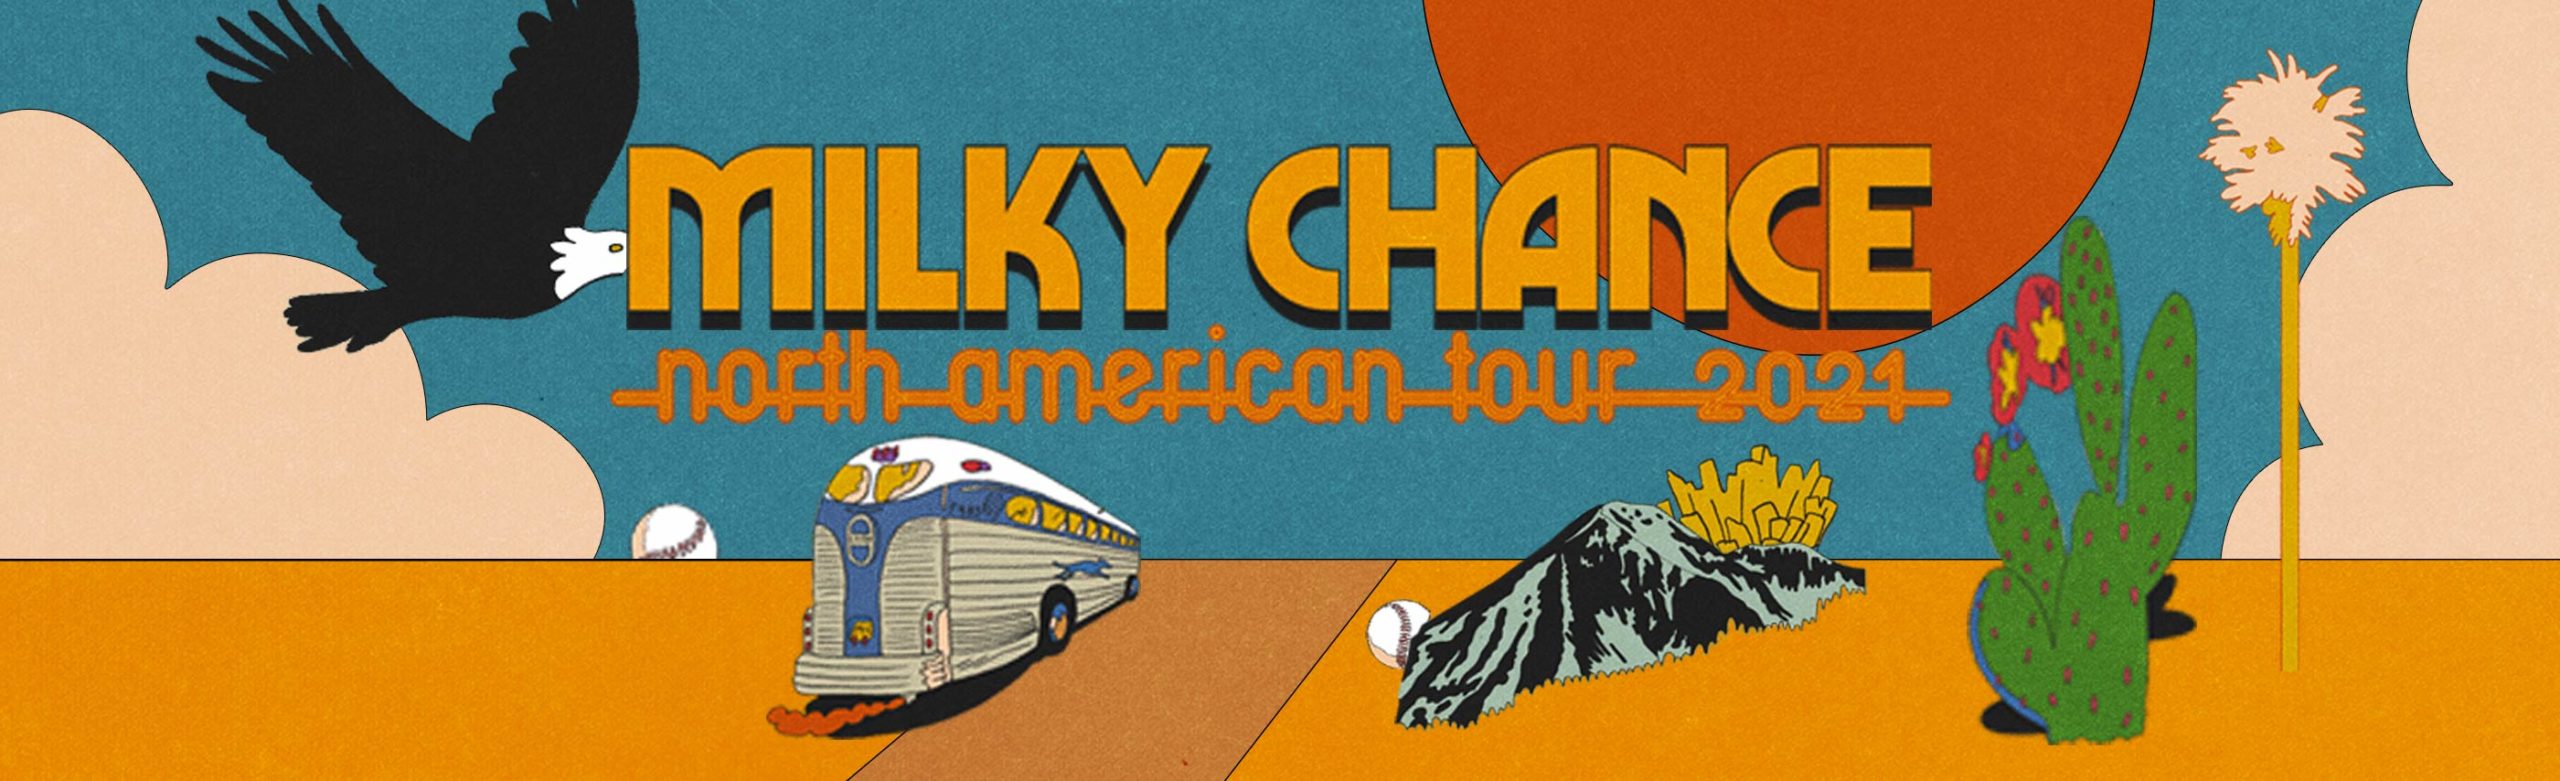 Event Info: Milky Chance at The Wilma 2021 Image